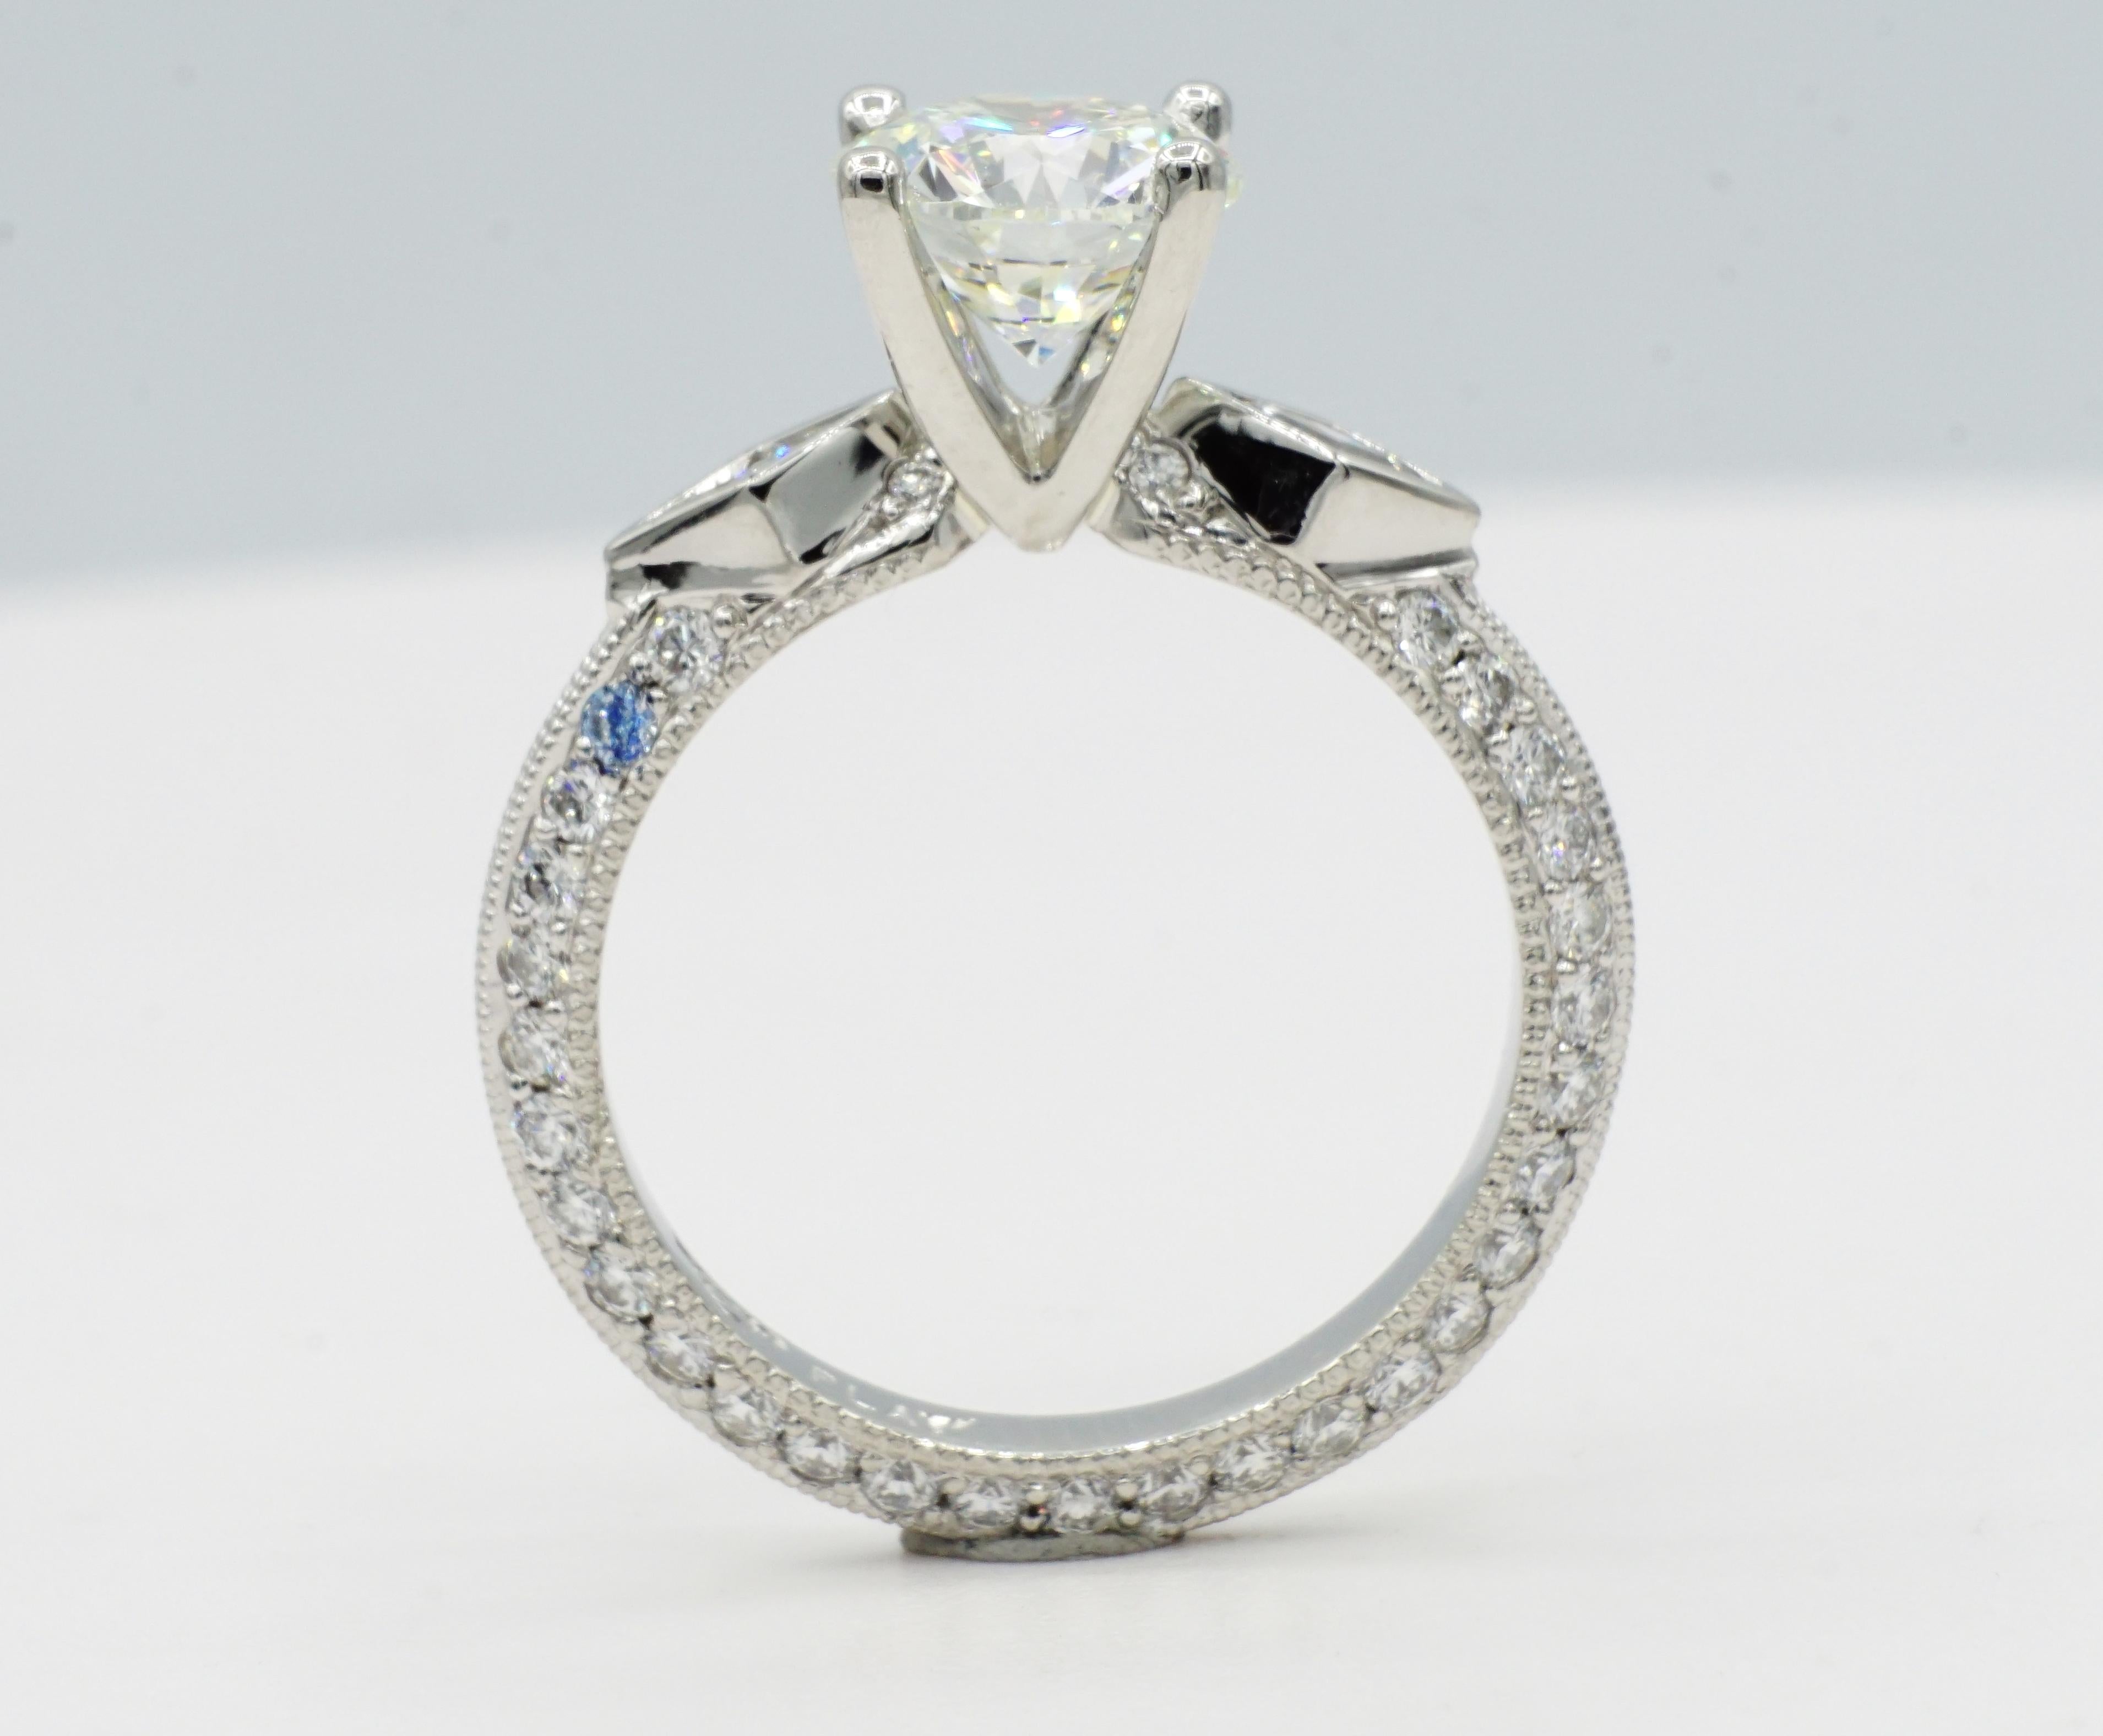 Beautiful platinum engagement ring with 1.59ct round brilliant diamond that is H color and VS2 in clarity. The center diamond has a very good polish, symmetry, and cut.  The center stone is set in a custom V-shaped setting, accented by two full